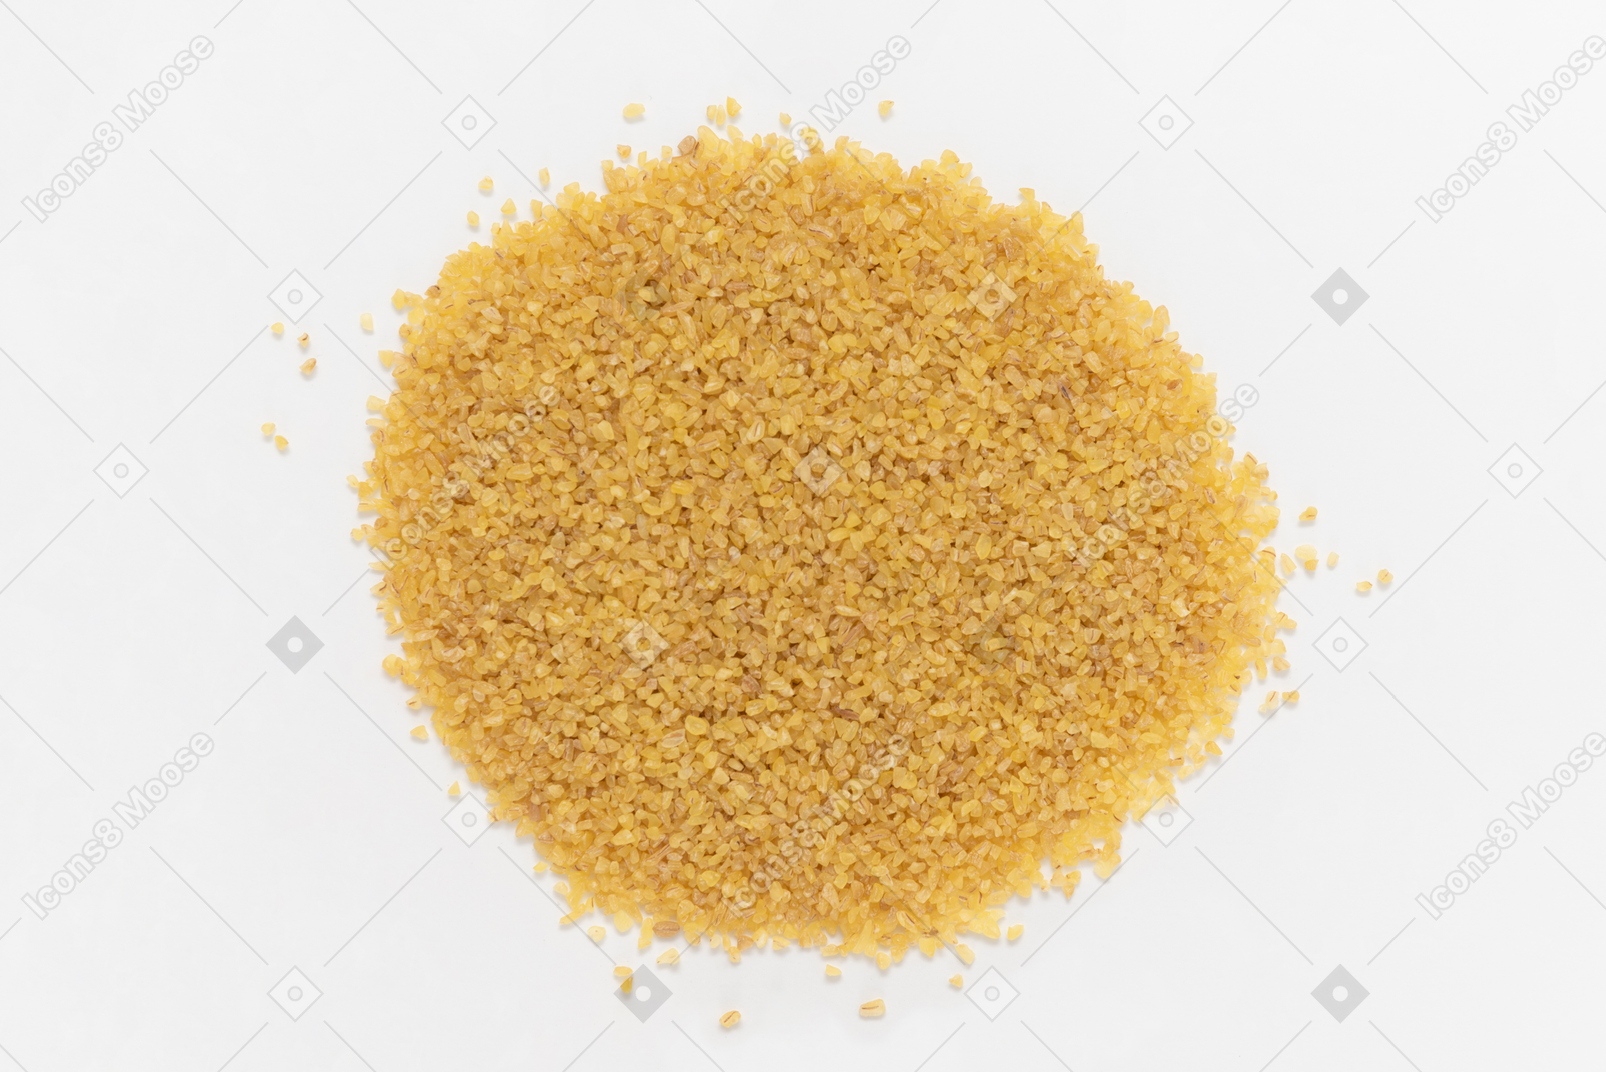 Pile of yellow seeds on white background